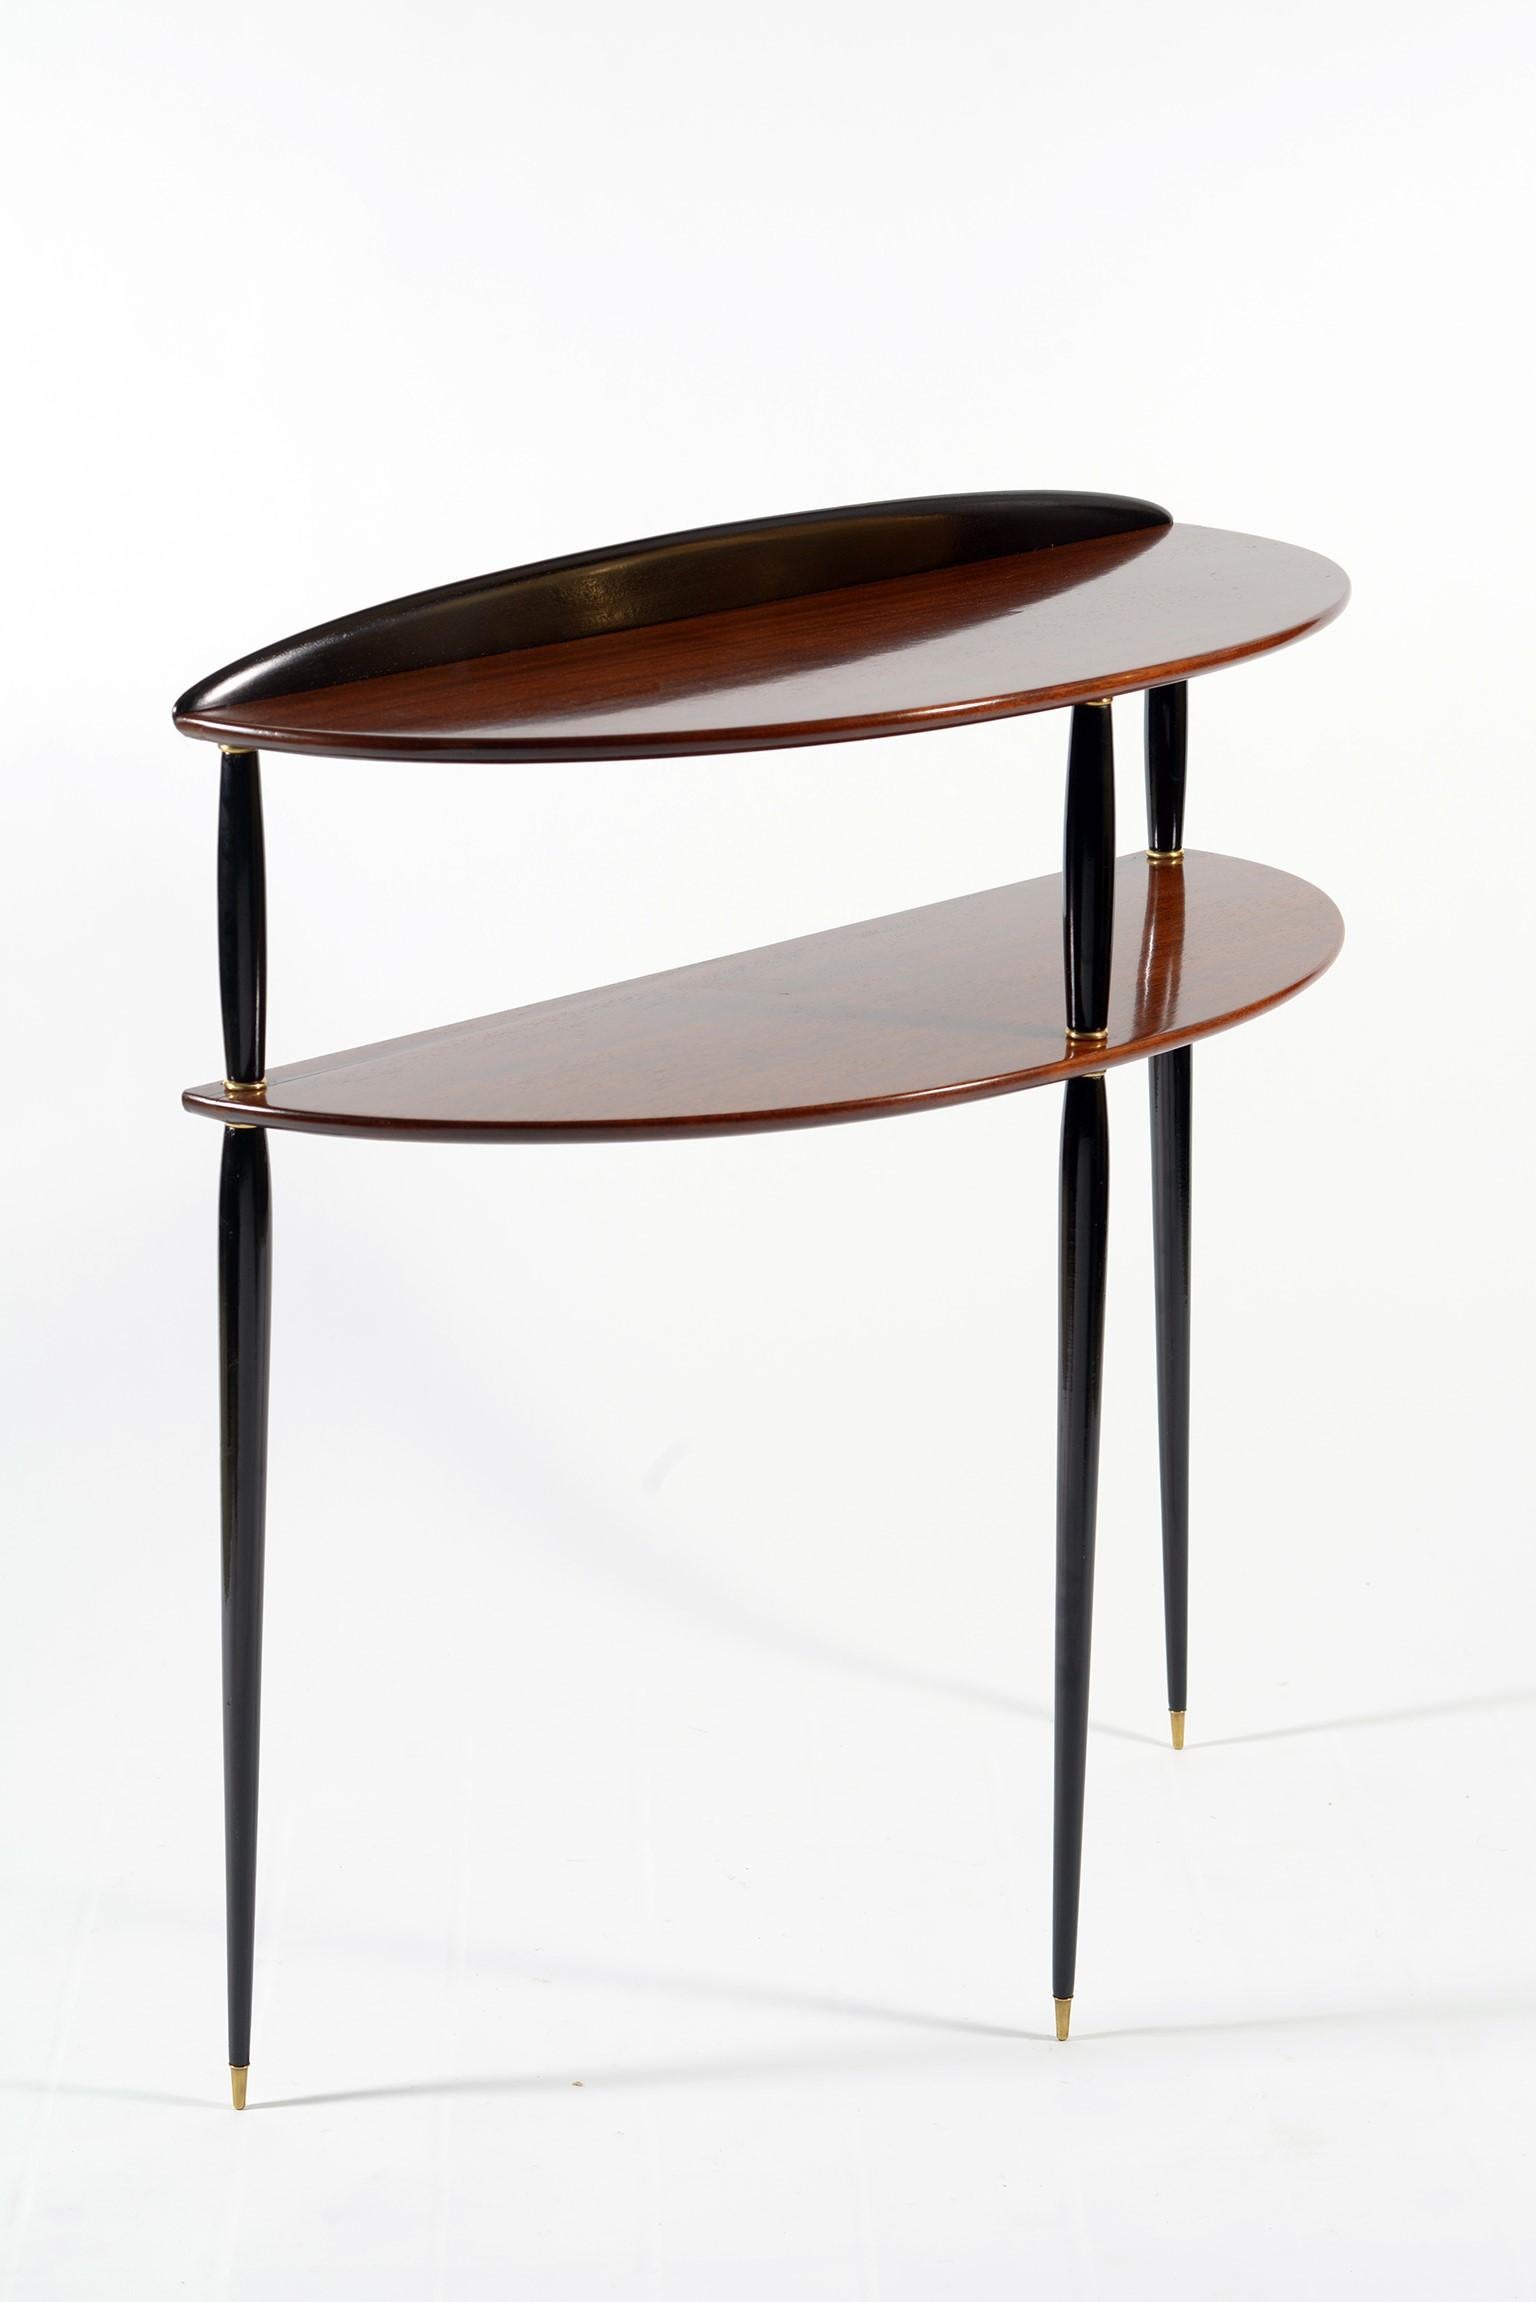 Slender Italian walnut console with double top in semi-round shape, three tapered legs in black lacquered wood interspersed with brass ring finishes and finished with conical tips always in brass, support the two floors and make this console